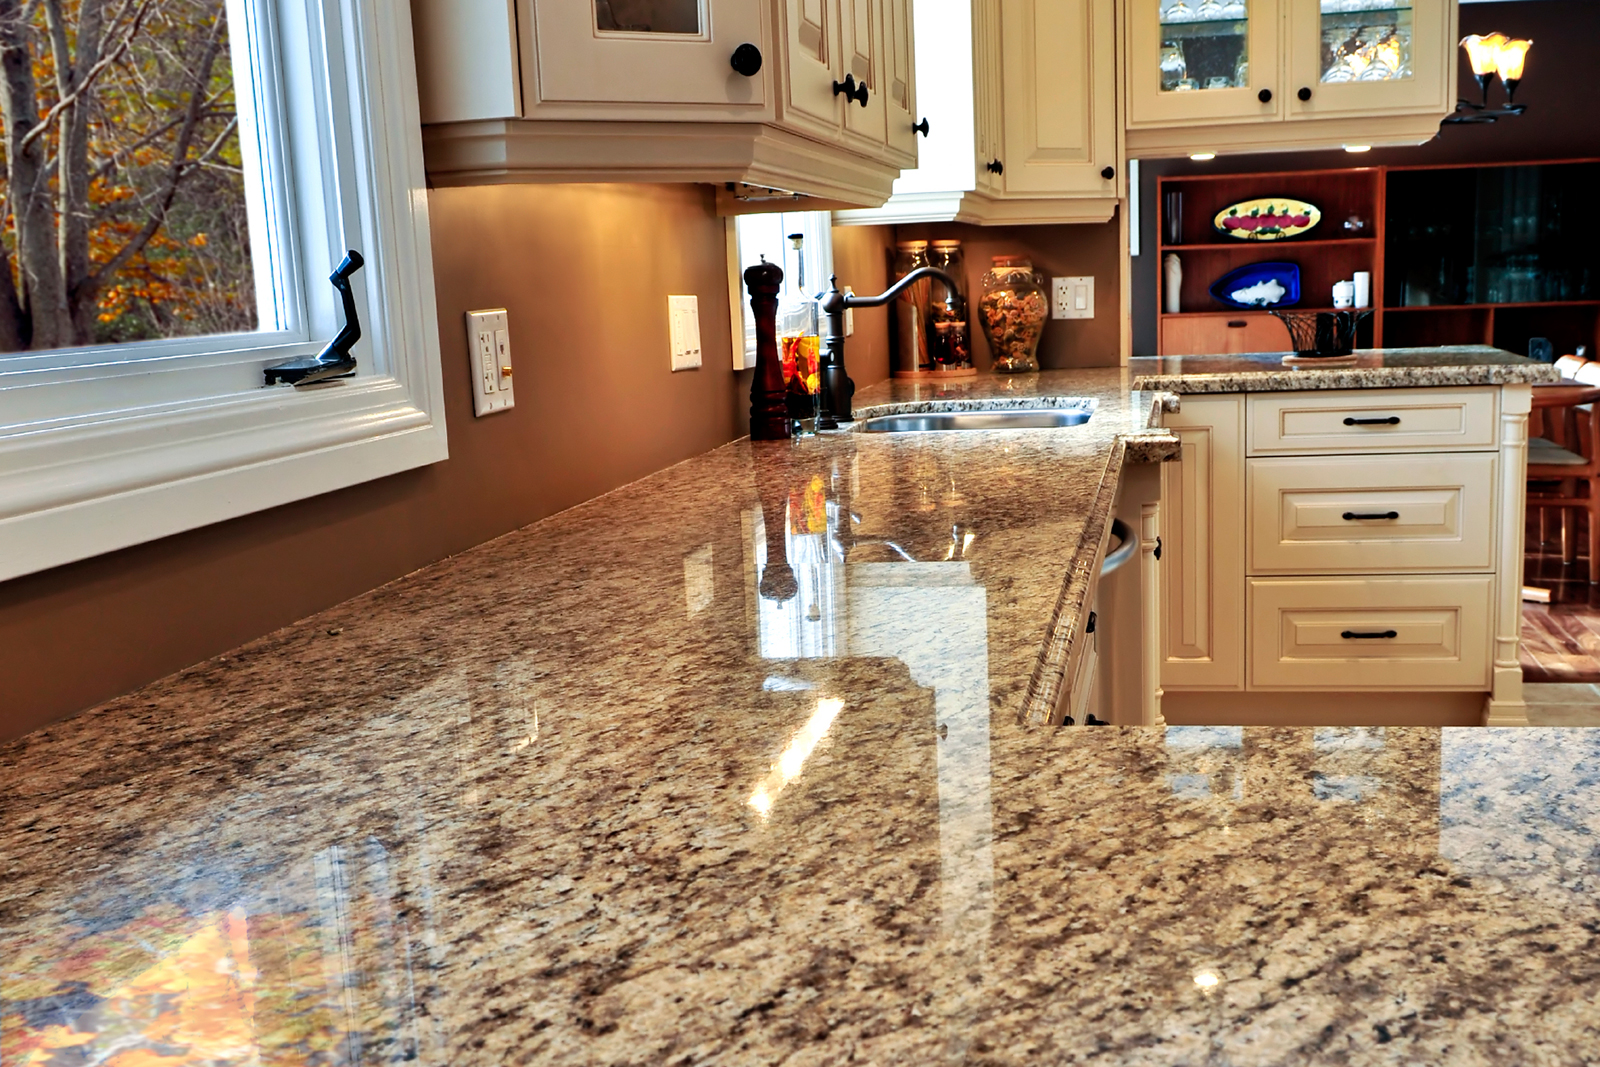 Repair Kitchen Countertop Scratches, How To Paint Laminate Kitchen Countertops Look Like Granite